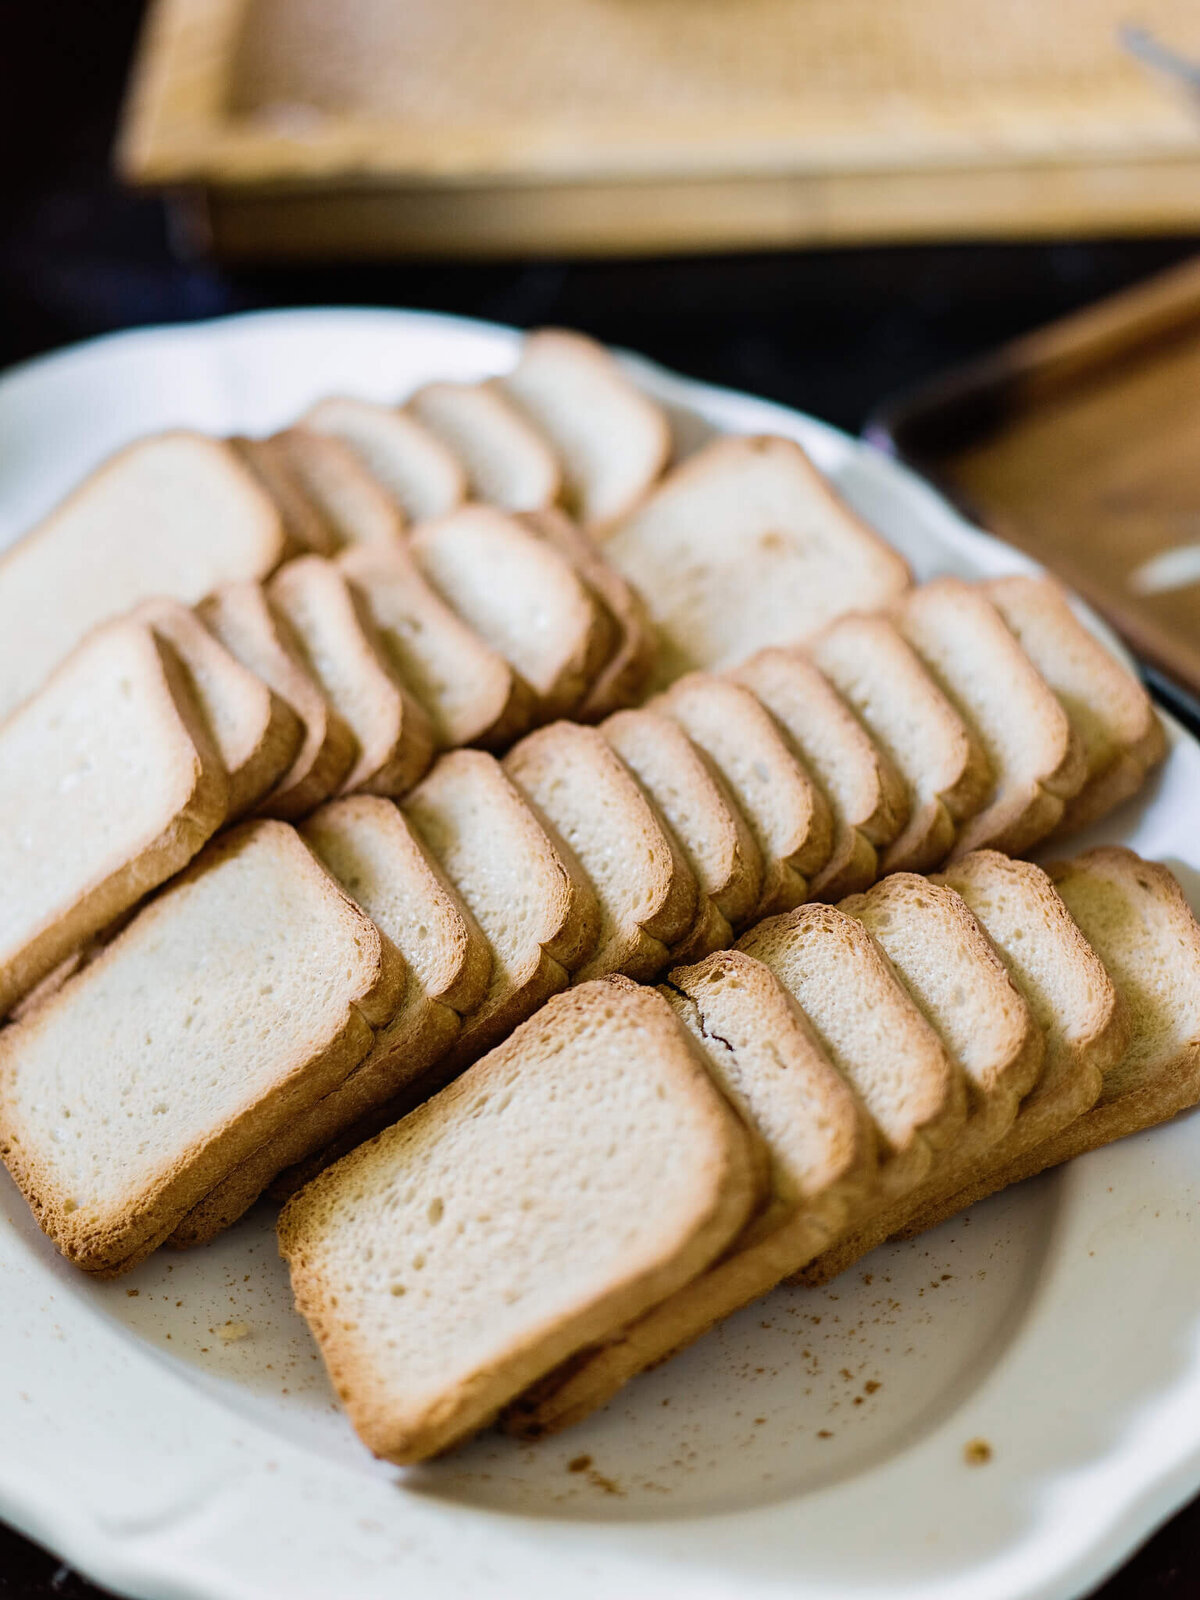 Lots of sliced bread on a large, round plate.